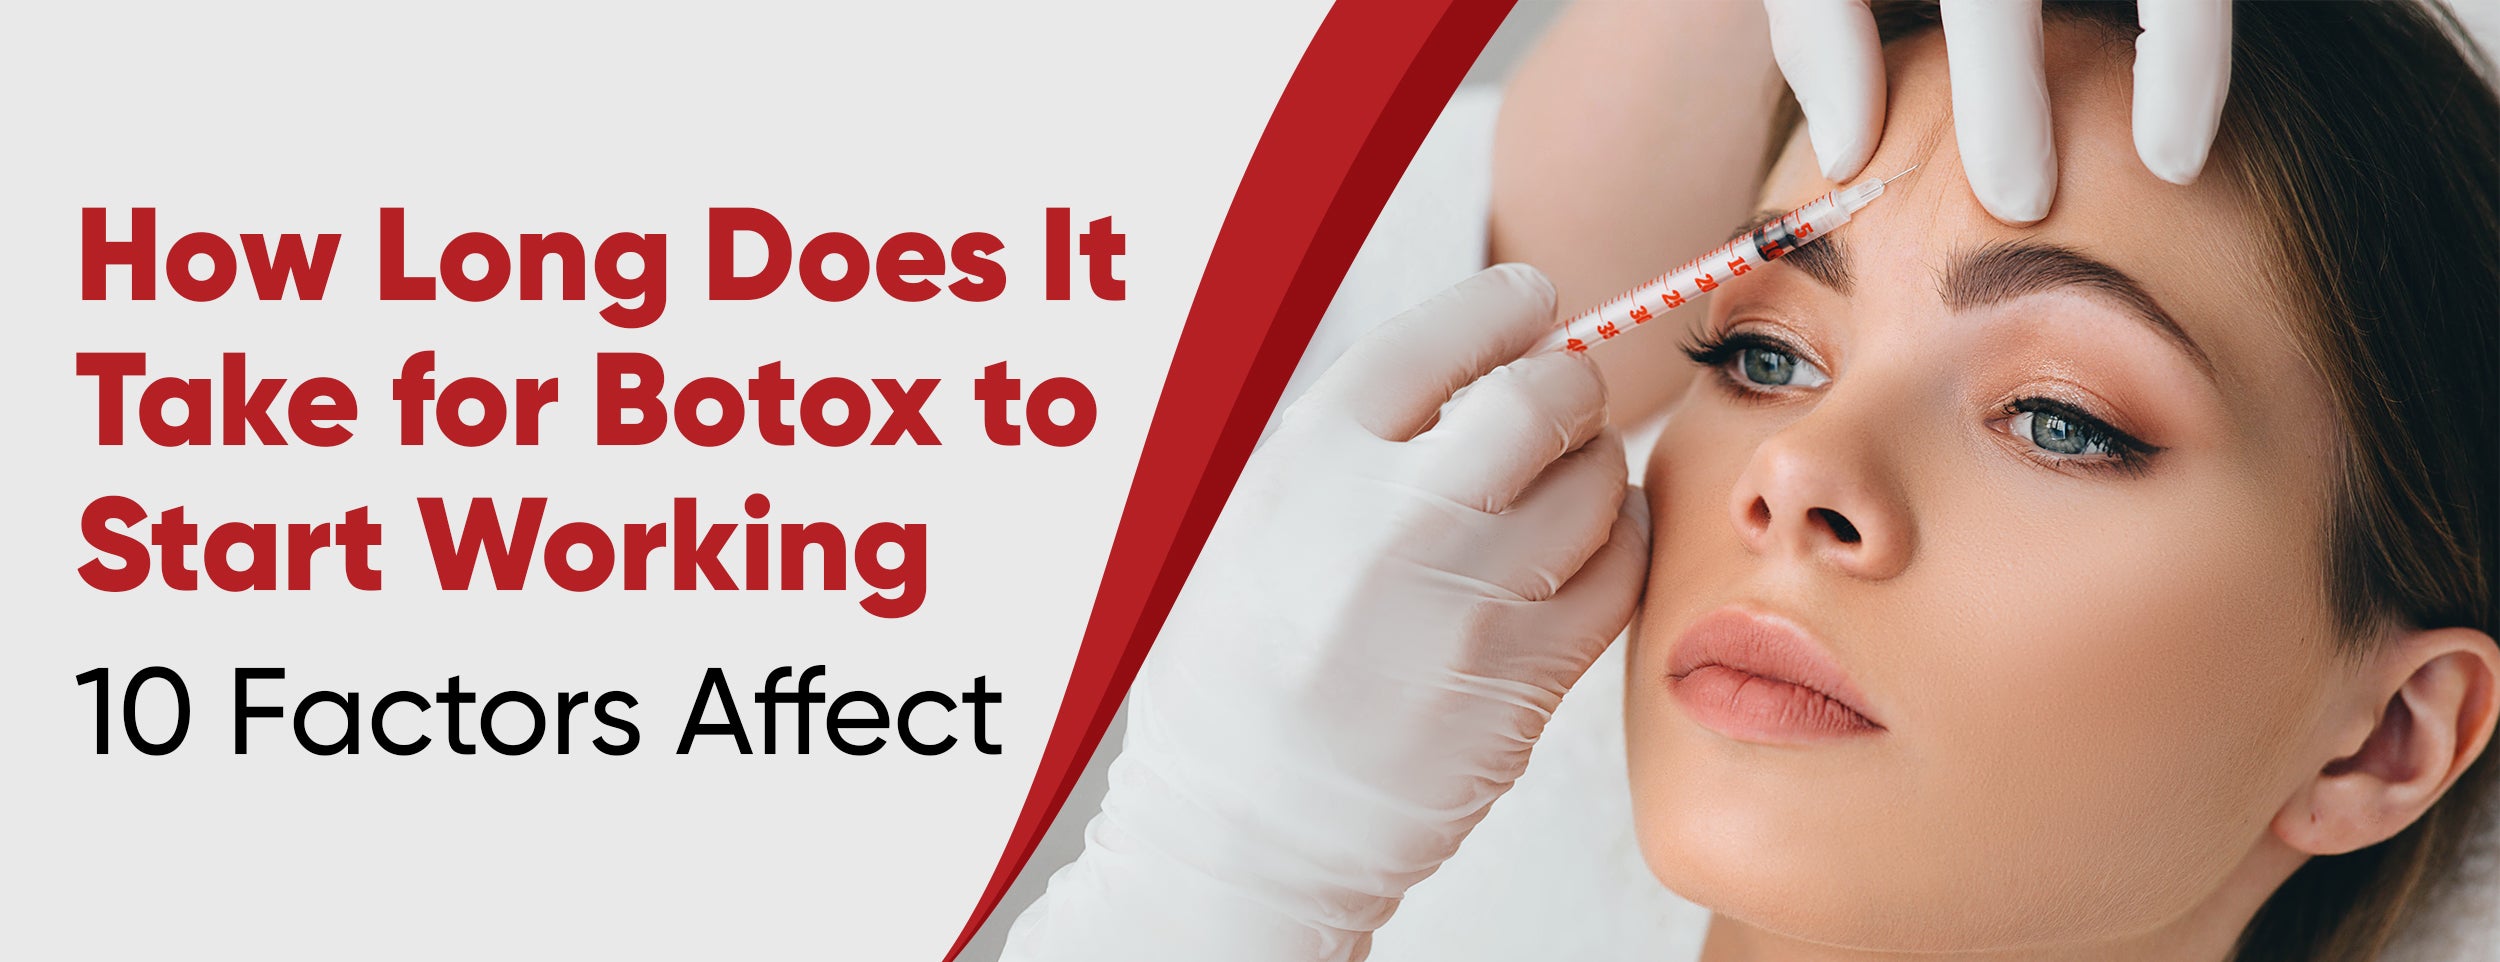 The 10 factors that affect how long Botox takes to work